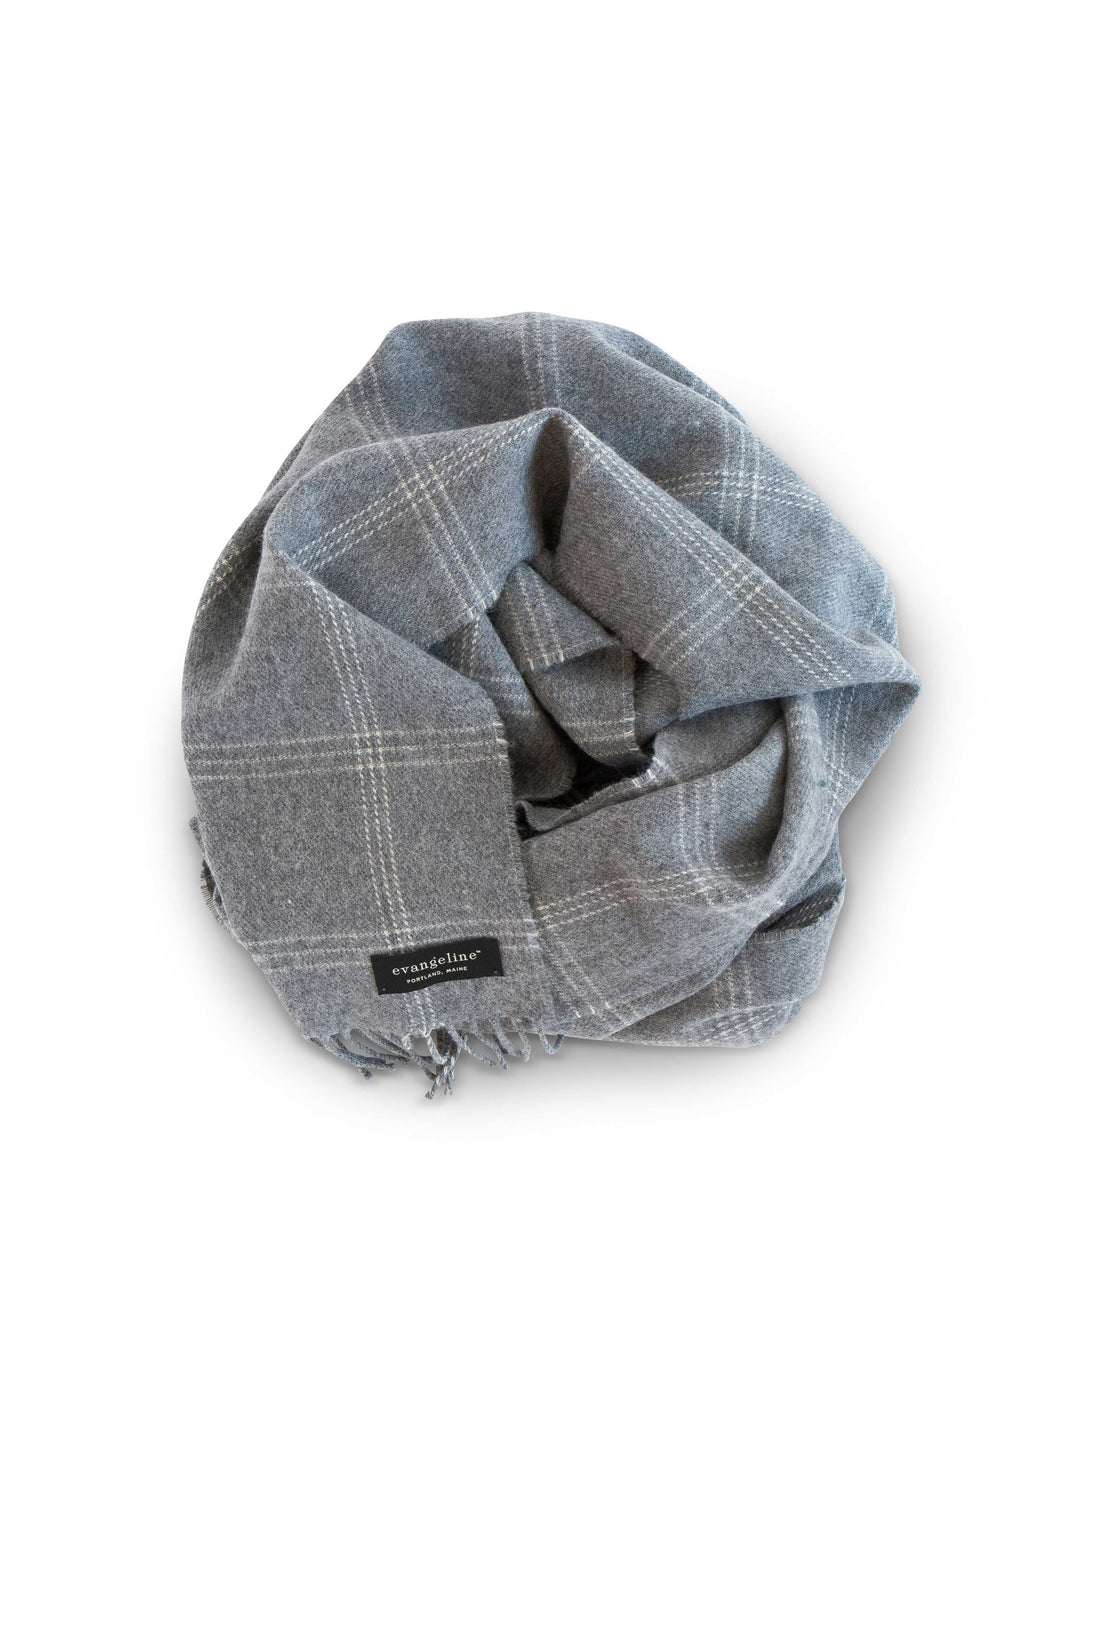 Evangeline Linens Merino Lambswool wearable wrap in grey / graphite windowpane pattern. Chic and cozy comfort on the go. 